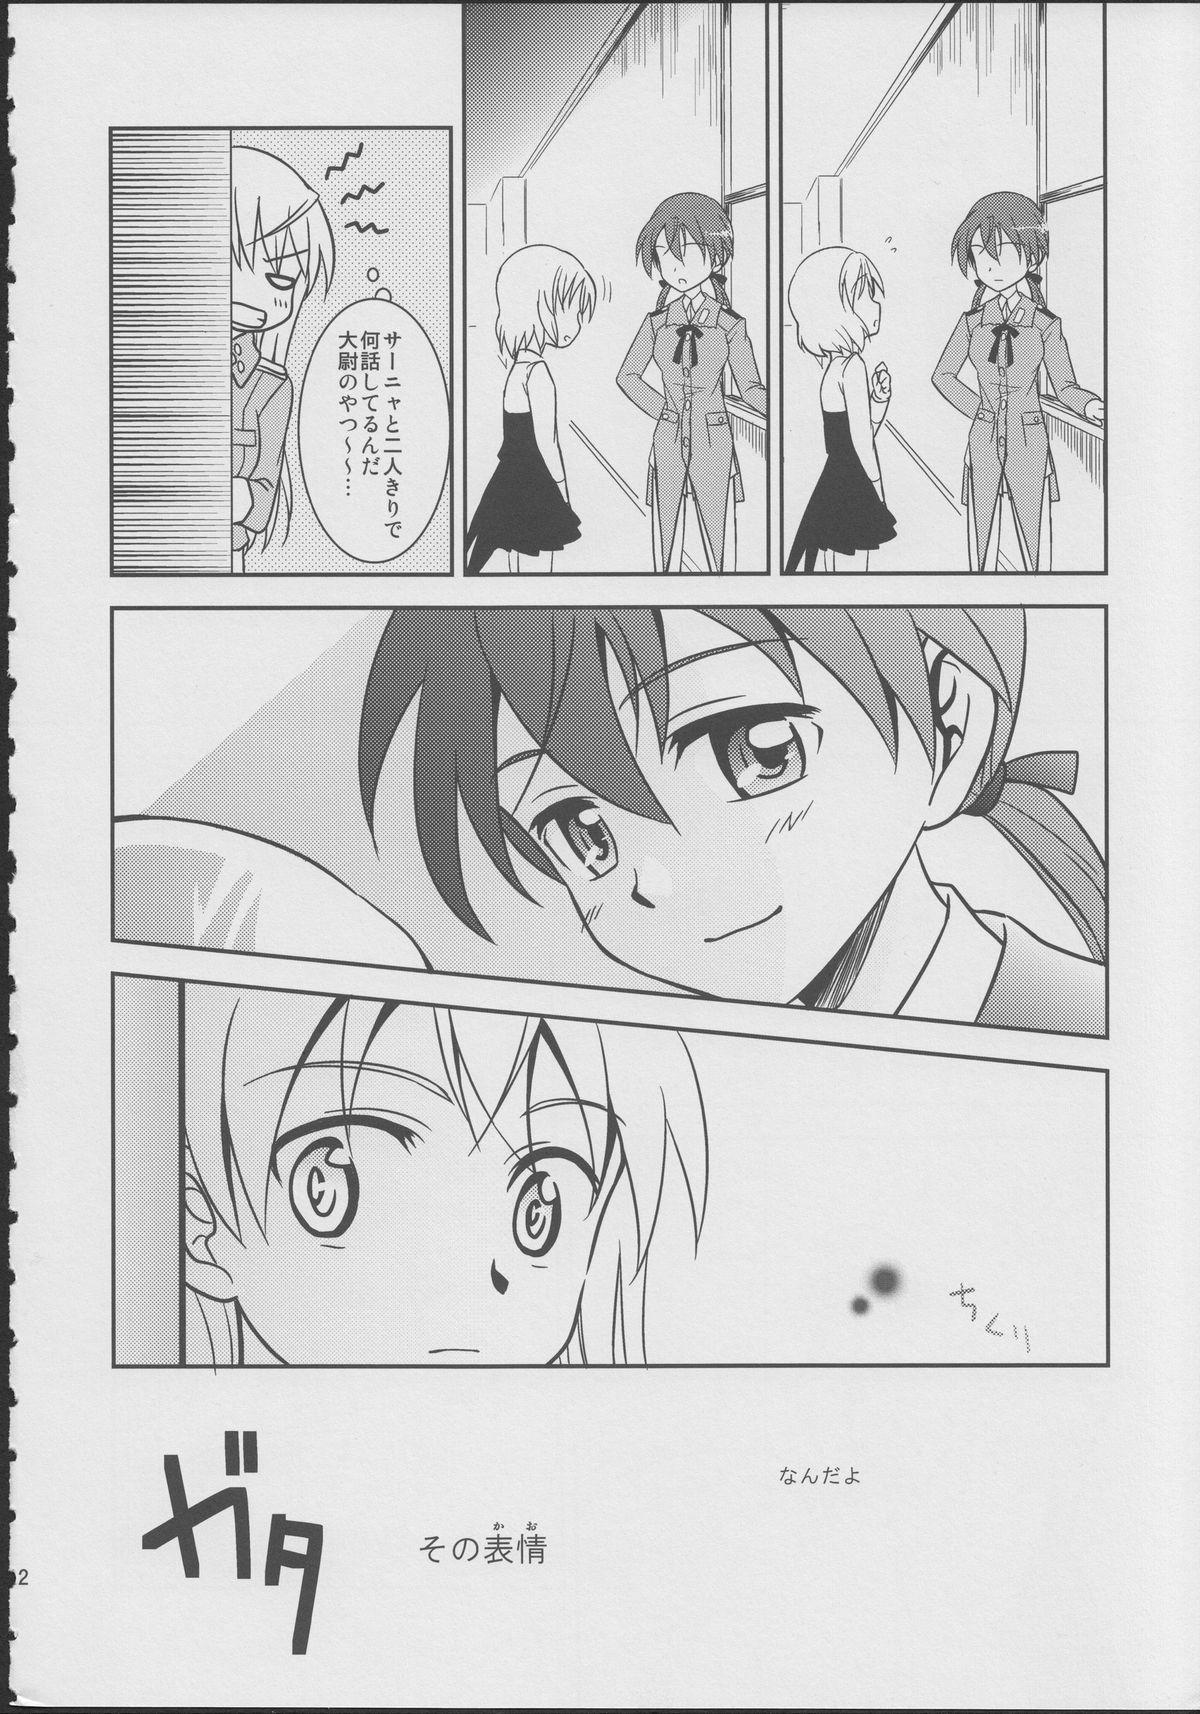 Concha Zygos! - Strike witches Foreplay - Page 11